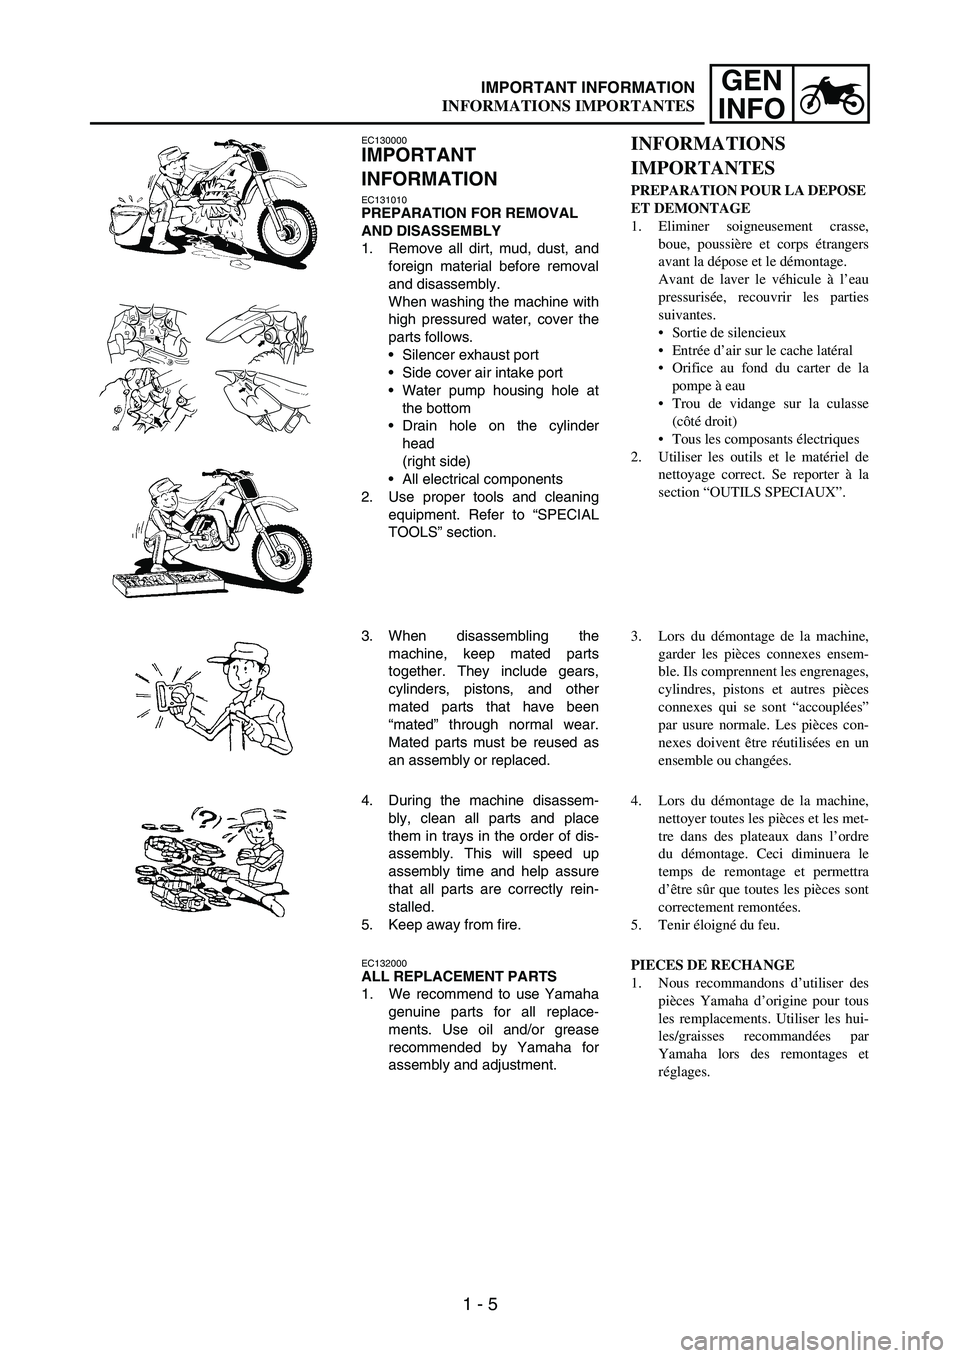 YAMAHA WR 250F 2004  Manuale de Empleo (in Spanish) 1 - 5
GEN
INFOIMPORTANT INFORMATION
EC130000
IMPORTANT 
INFORMATION
EC131010PREPARATION FOR REMOVAL 
AND DISASSEMBLY
1. Remove all dirt, mud, dust, and
foreign material before removal
and disassembly.